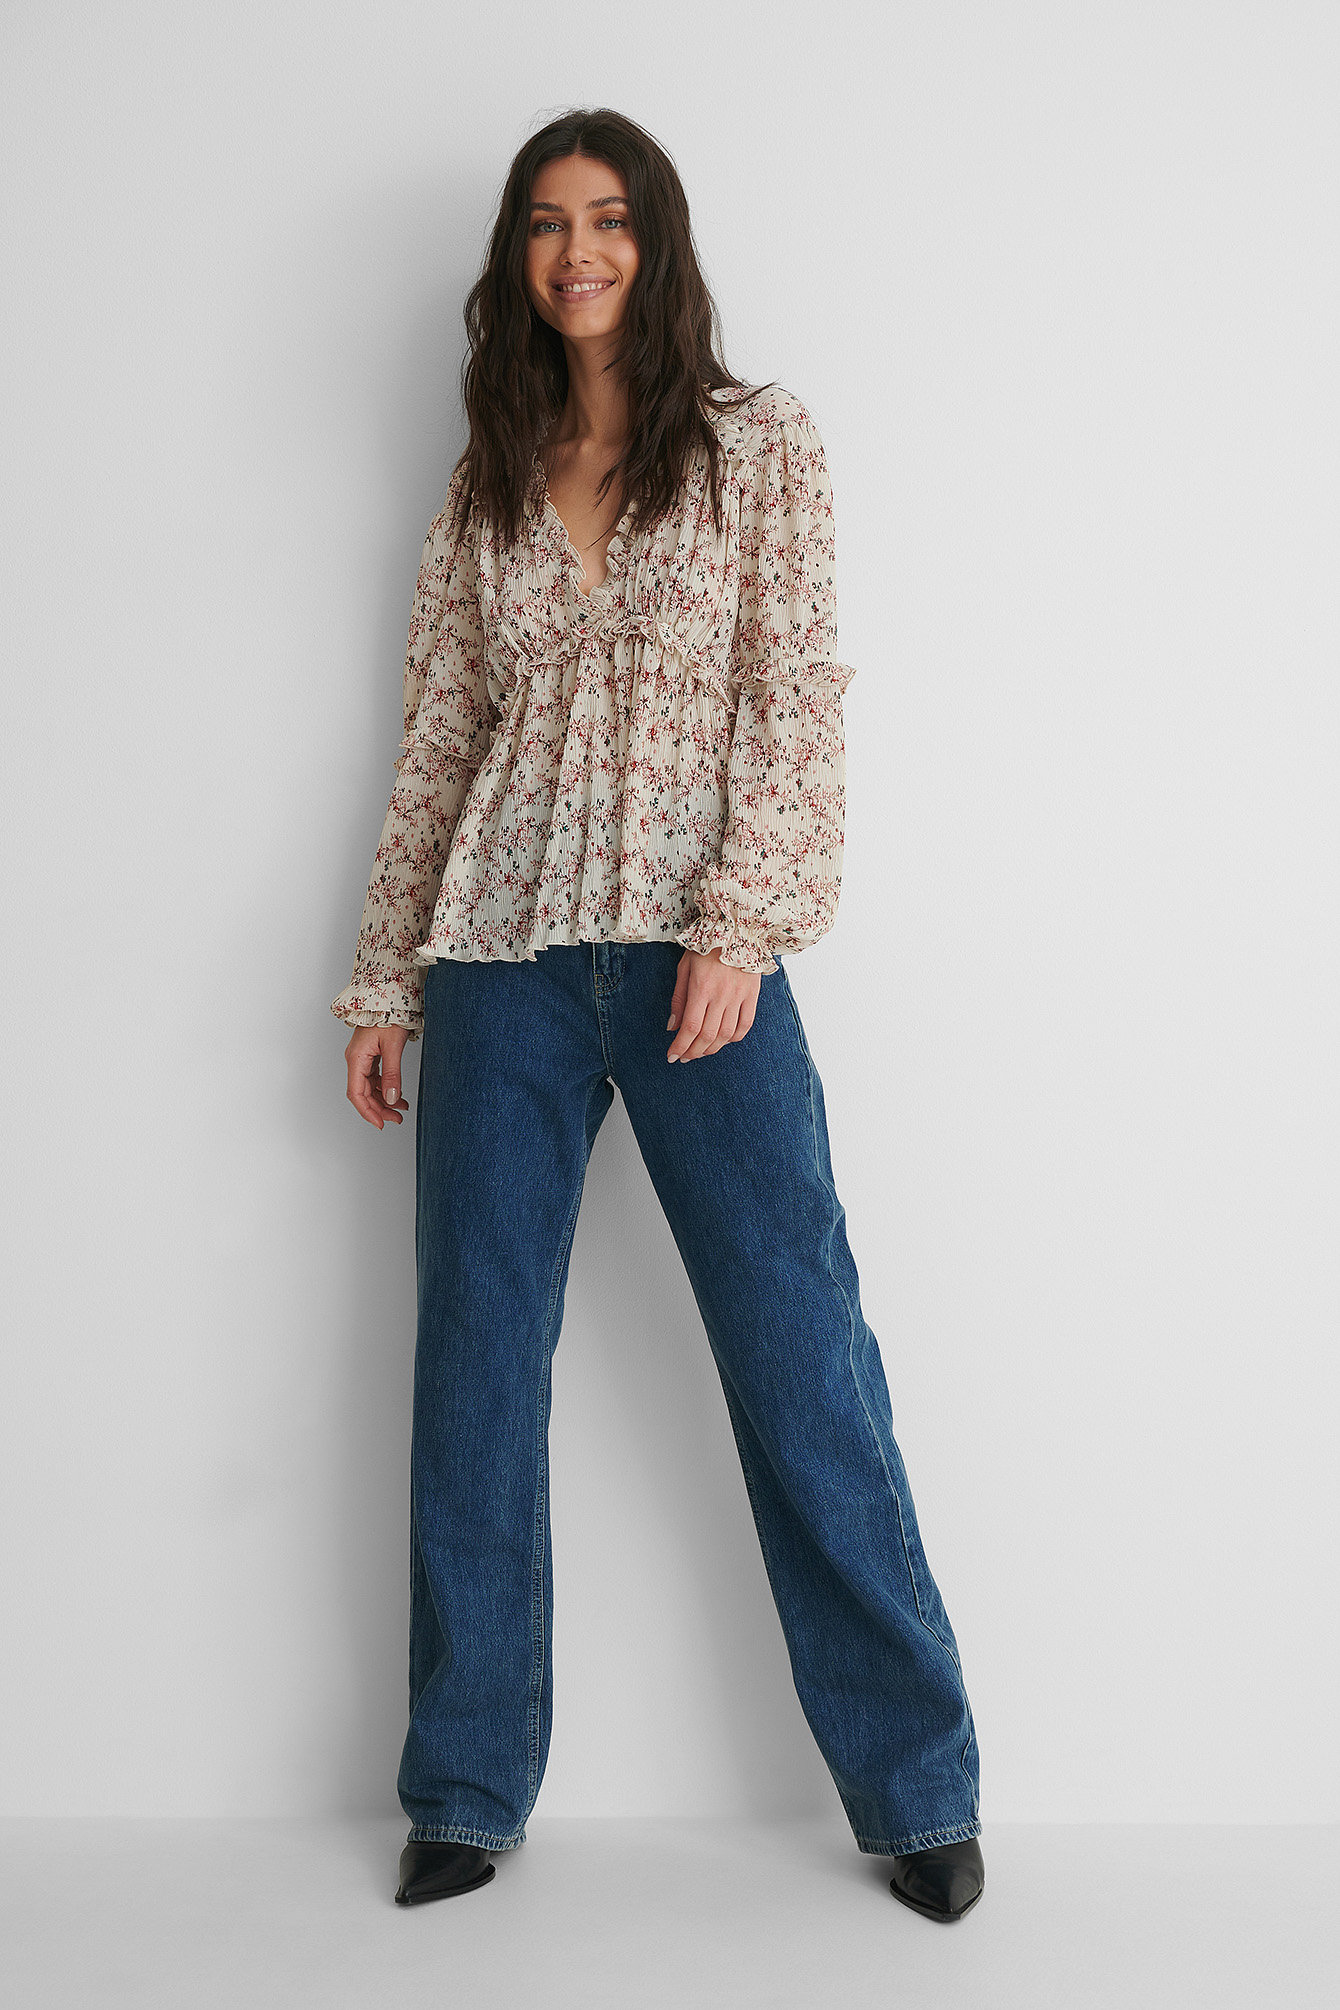 Structured Printed Frill Blouse with Dark Blue Denim.